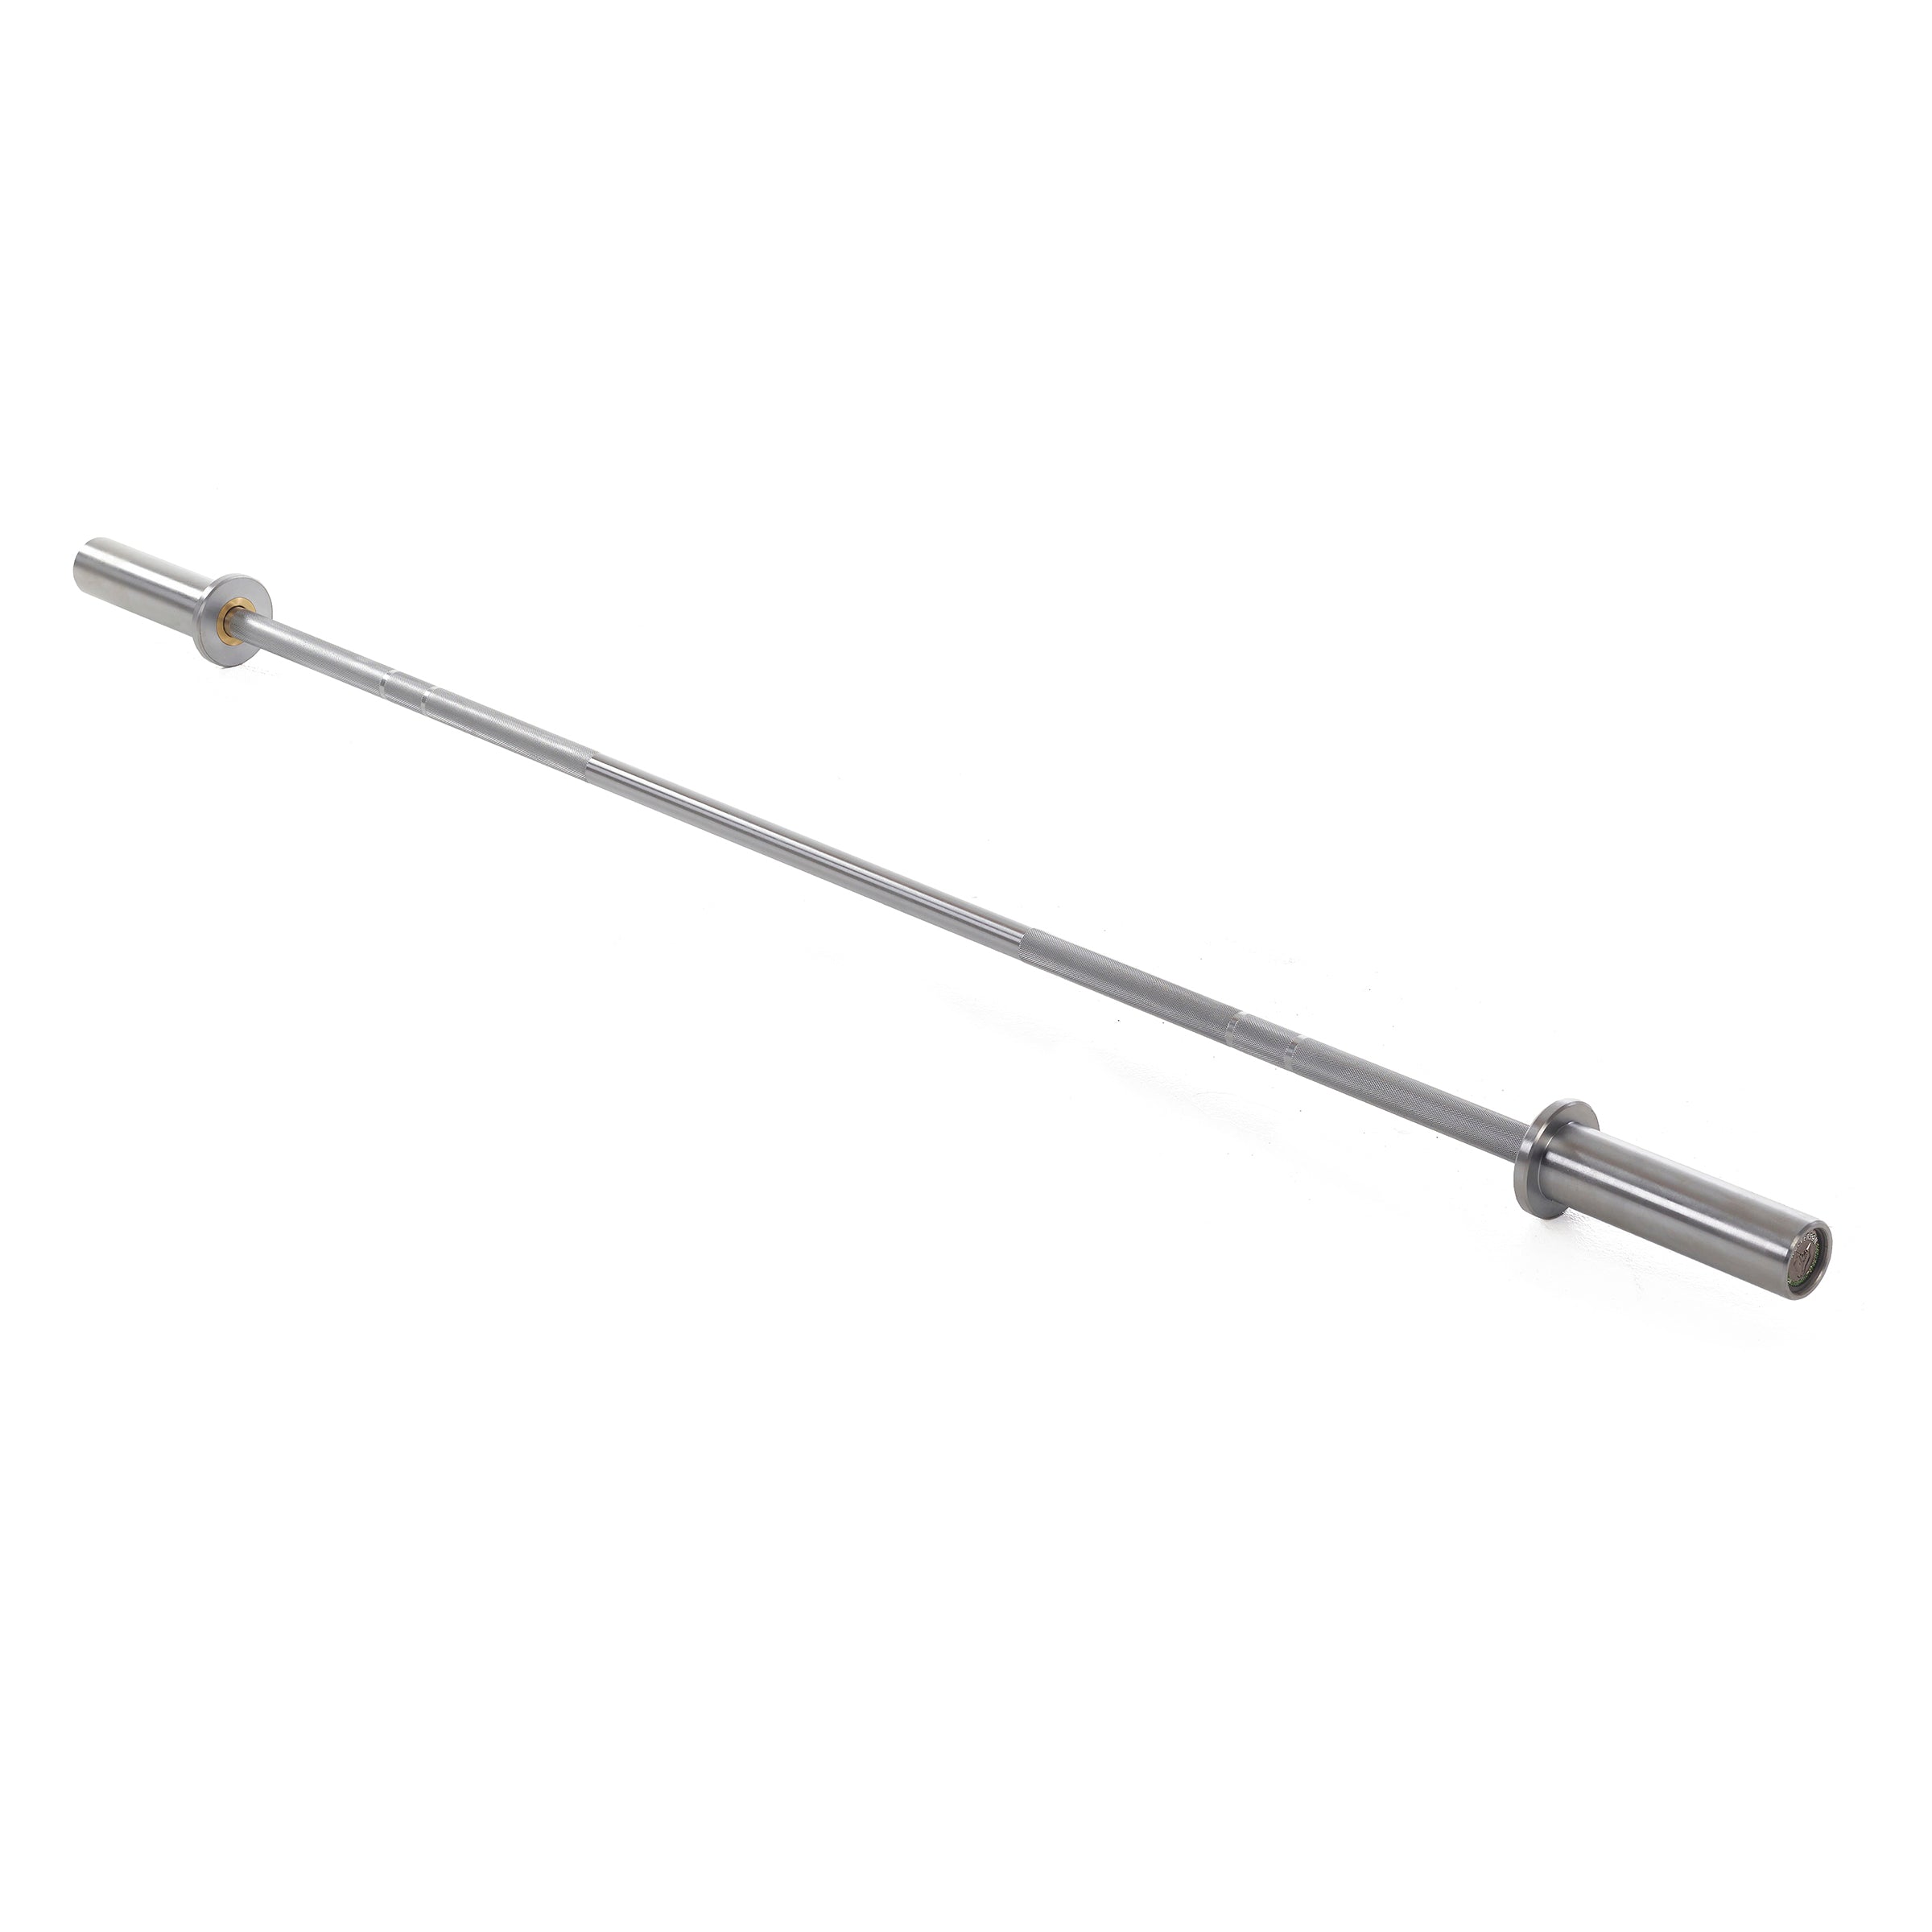 Bison™ 5.5ft 10kg Junior Technique Olympic Weight Lifting Bar - Wolverson Fitness